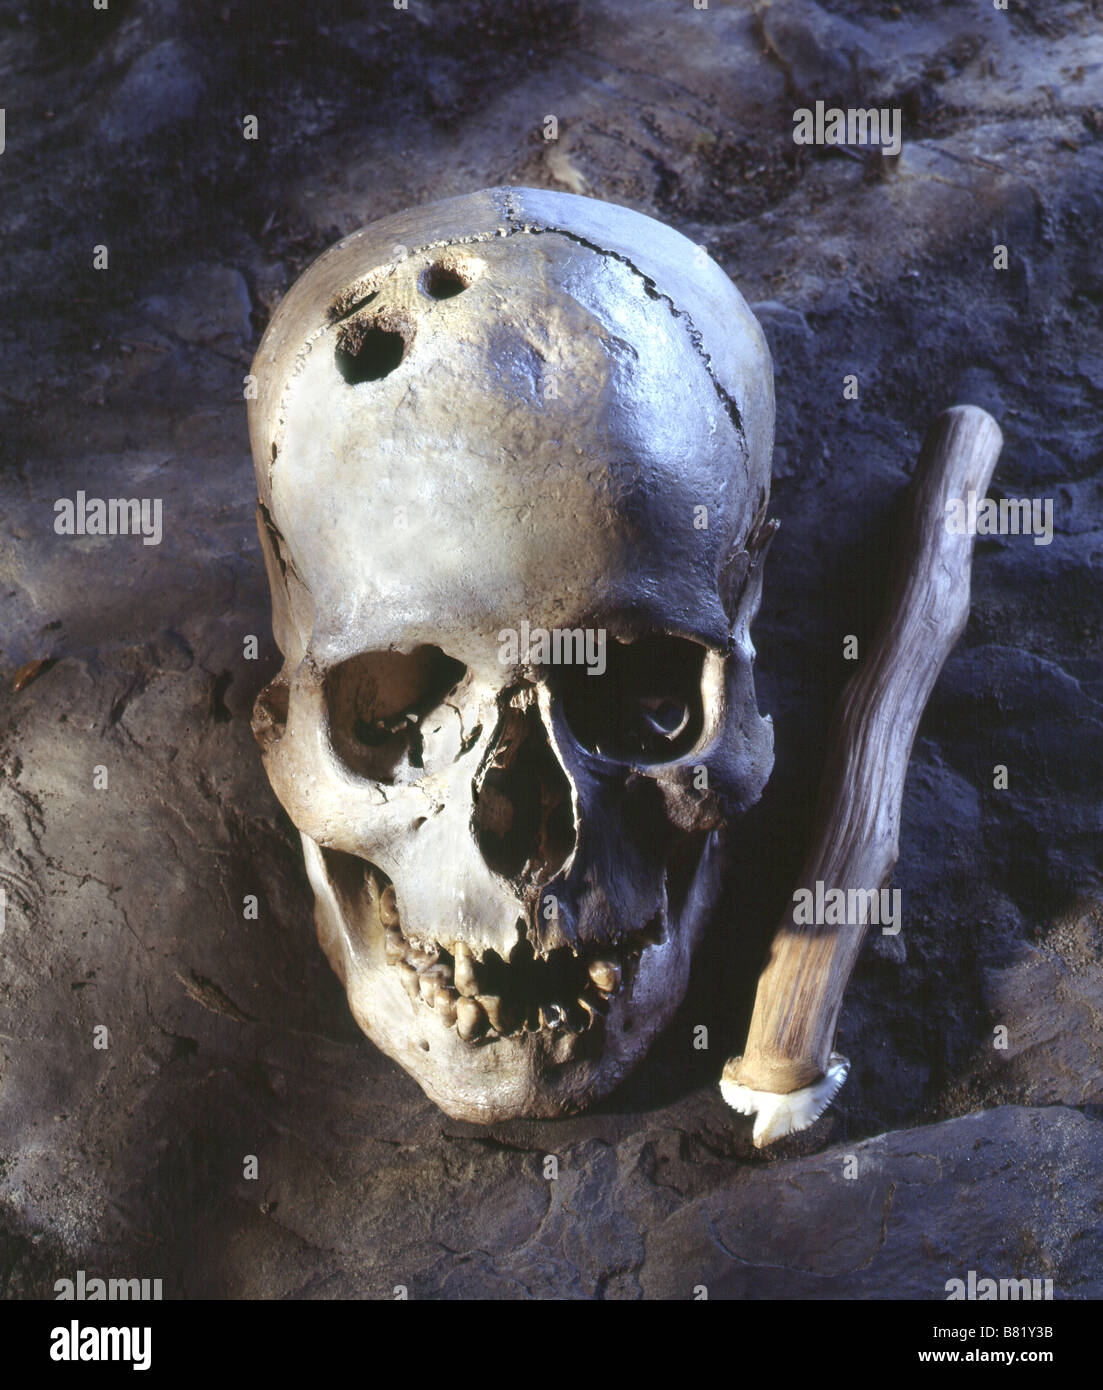 This Skull is the subject of a ancient surgery technique called Trephination. Stock Photo